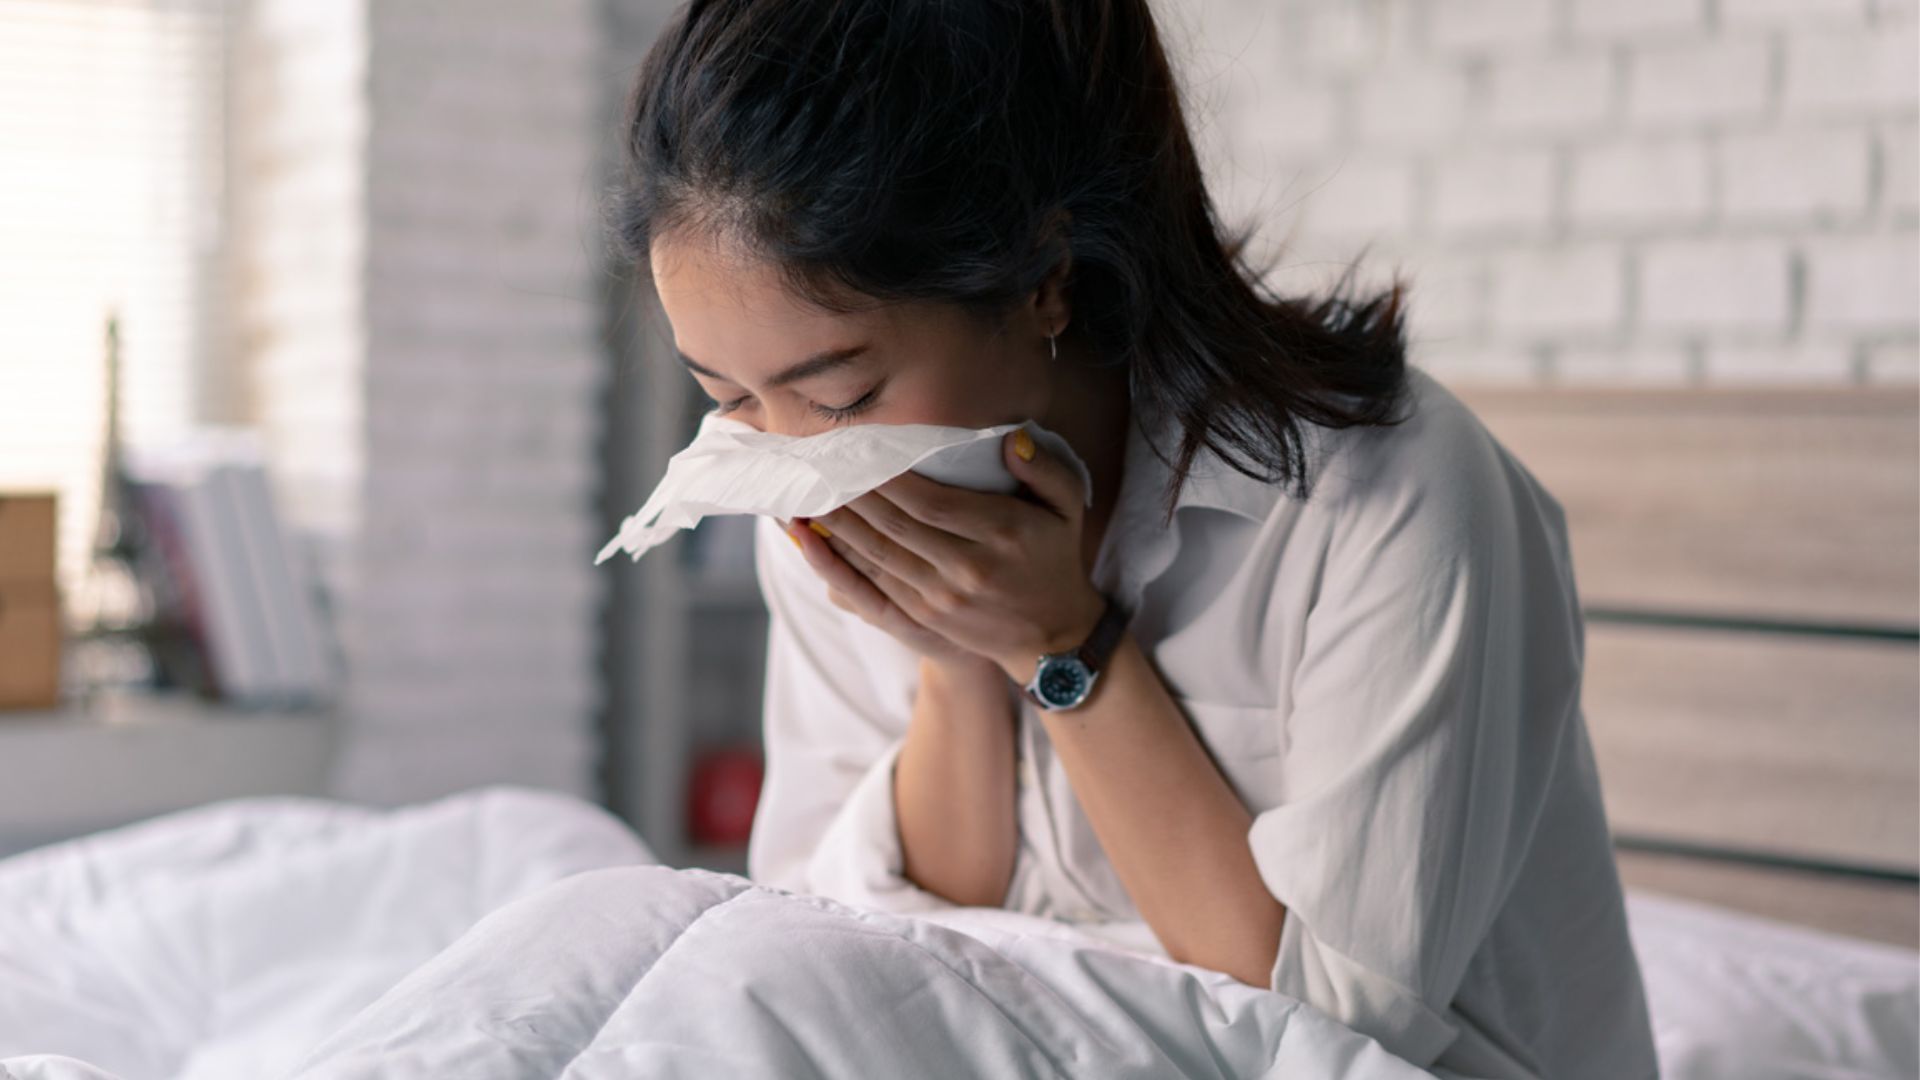 Women Holding Coughing With Tissue On Mouth